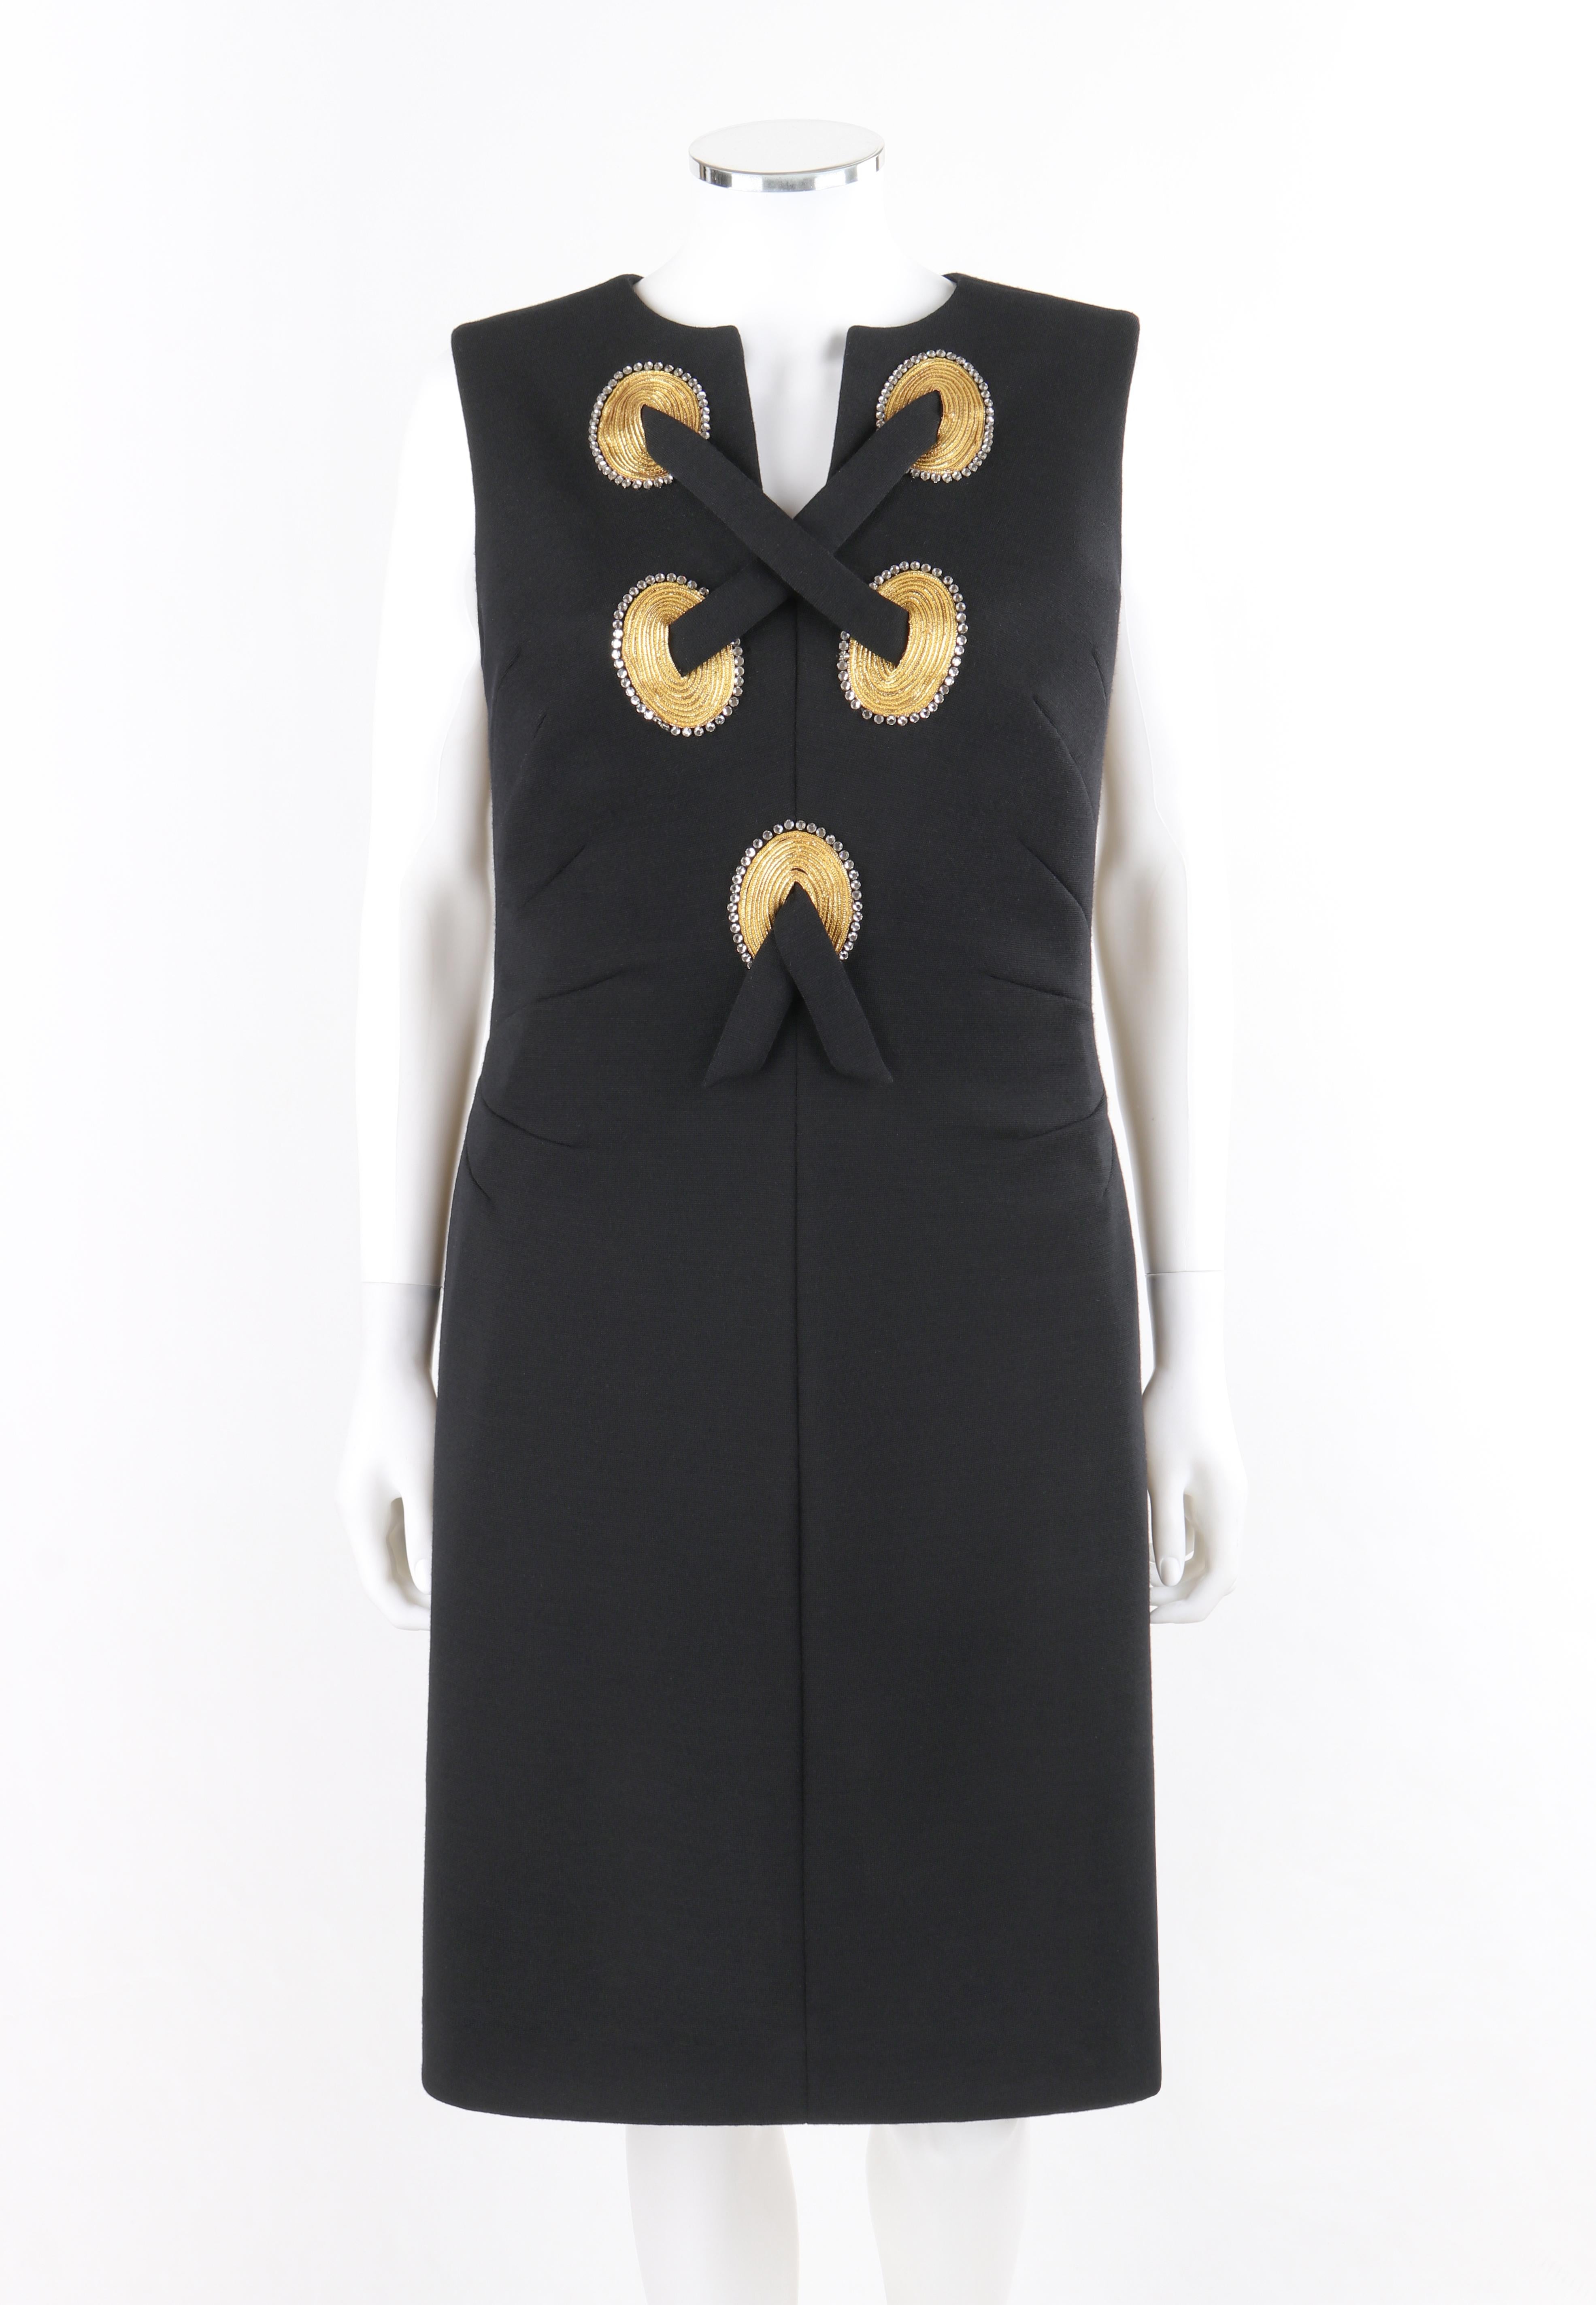 ABELLA PARIS c.1960’s Black Gold Embellished Lace-Up Front Fitted Sheath Dress

Circa: Late 1950's/ early 1960’s 
Label(s): Abella Paris; garment number tag
Style: Sheath dress
Color(s): Shades of black, gold, and silver
Lined: No
Unmarked Fabric